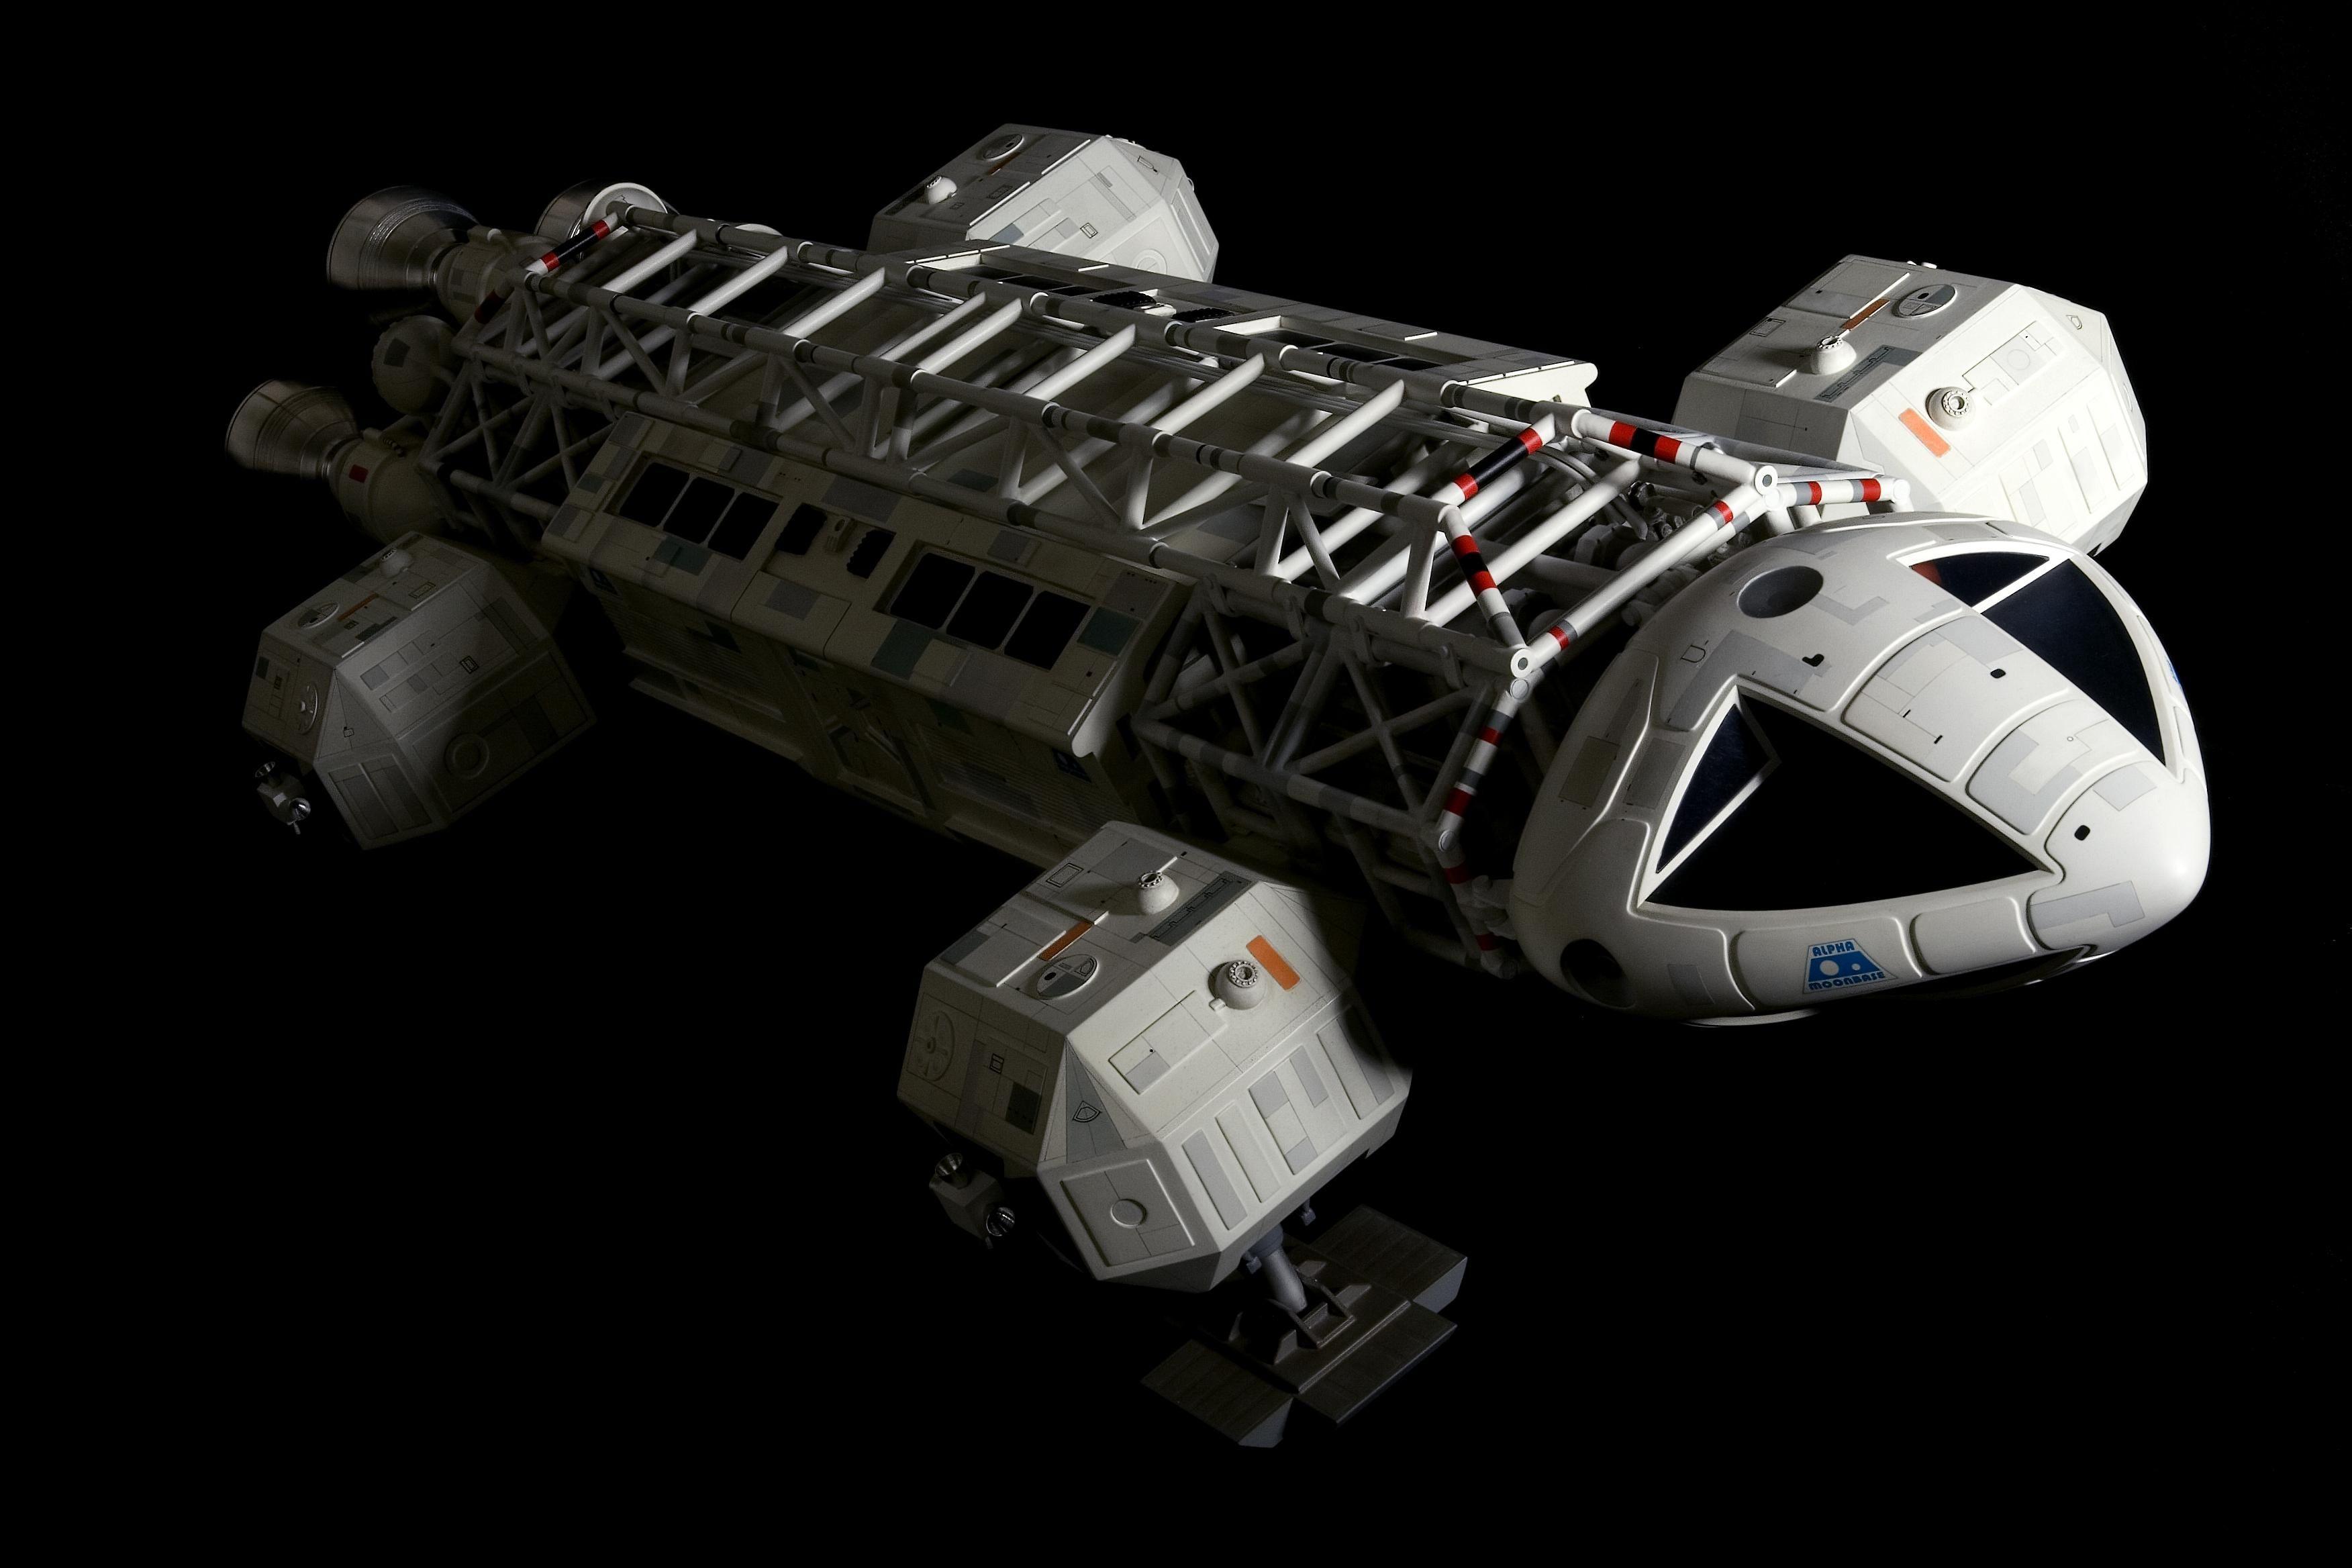 Space 1999 Catacombs AB 44inch Replica by Jon Wilson Image